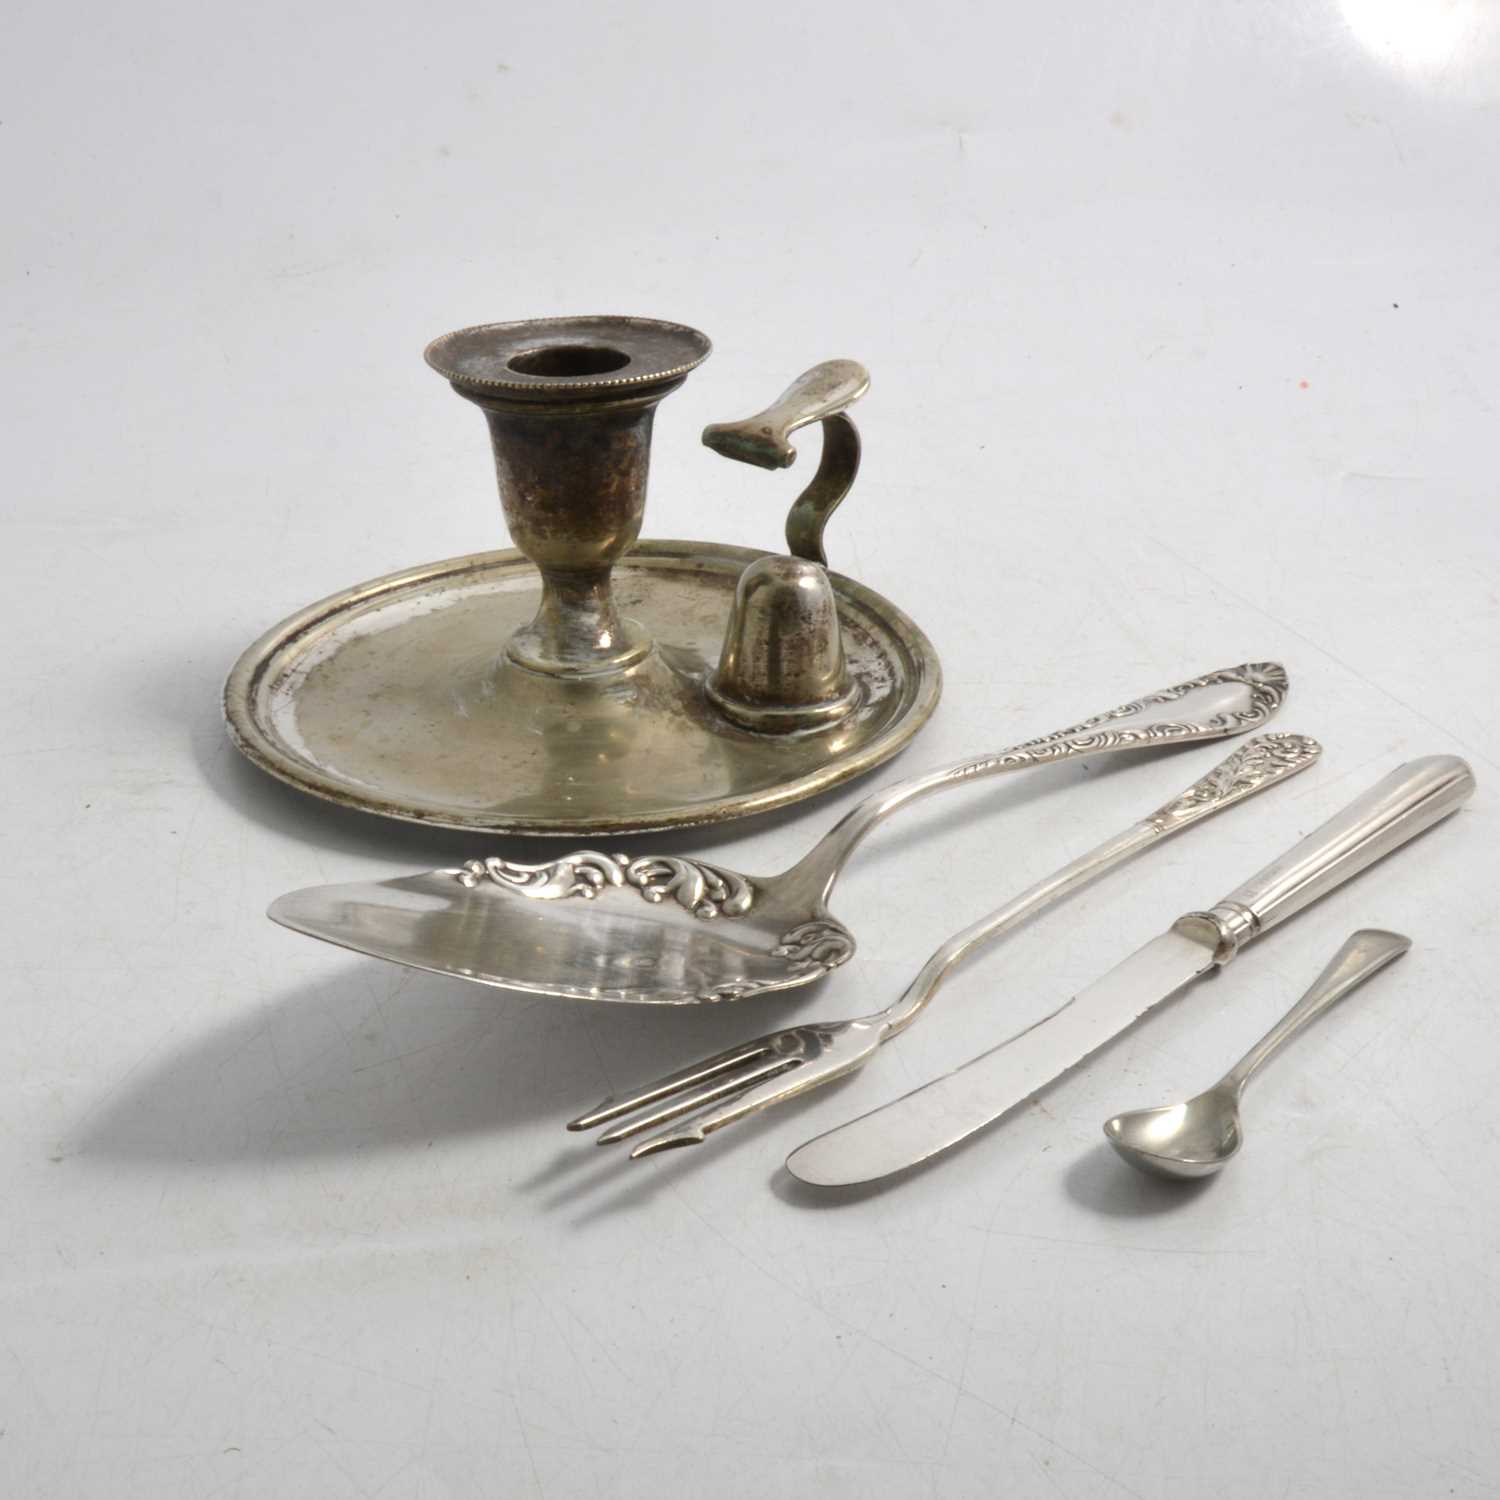 Lot 143 - Collection of plated flatware, silver handled knives and other xylonite knives.